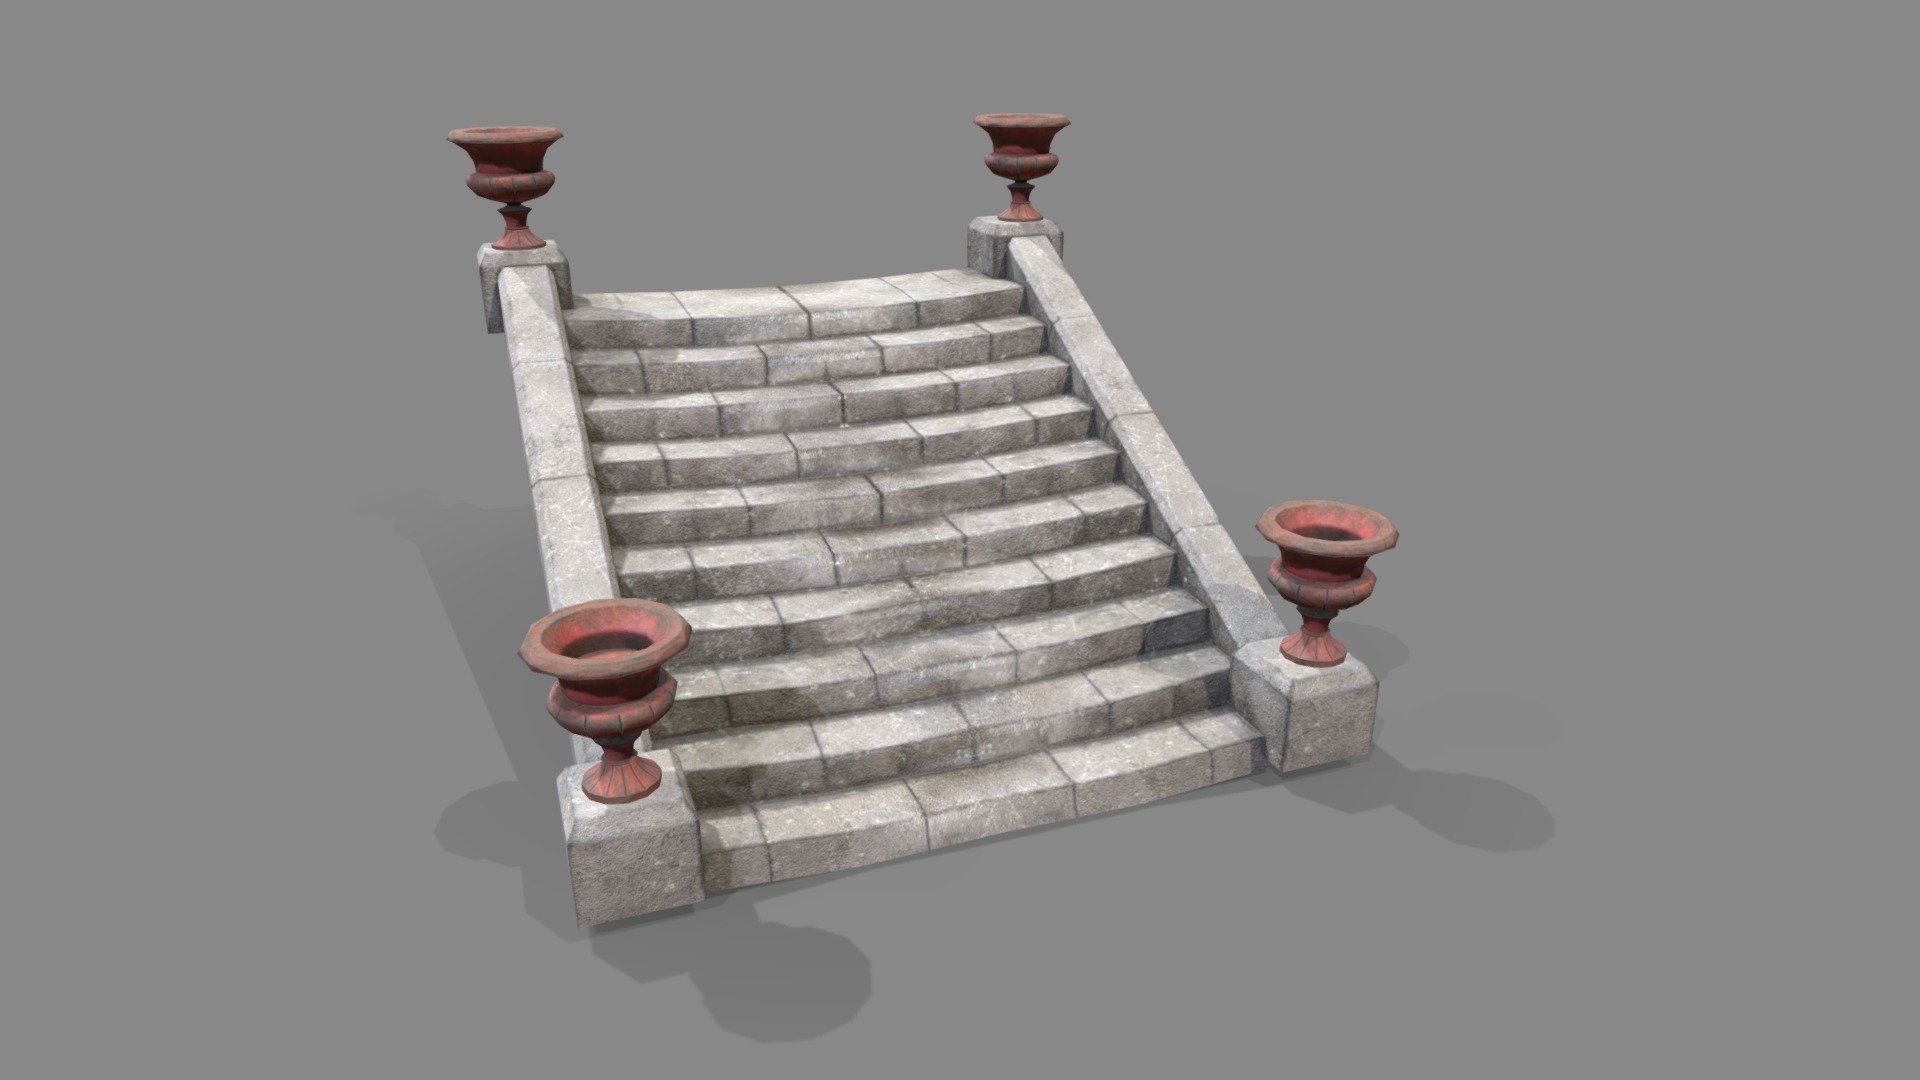 Low poly Victorian stairs with Urns

Overlapping UVs  for the stair, none over lapping for the Urns.

urn is 337 Polys and the stairs are 138 polys
Textures 4096x4096 Defuse, Metallic, Roughness, normal, AO.

Also included is the .spp for ease of editing the texture on substance painter 3d model